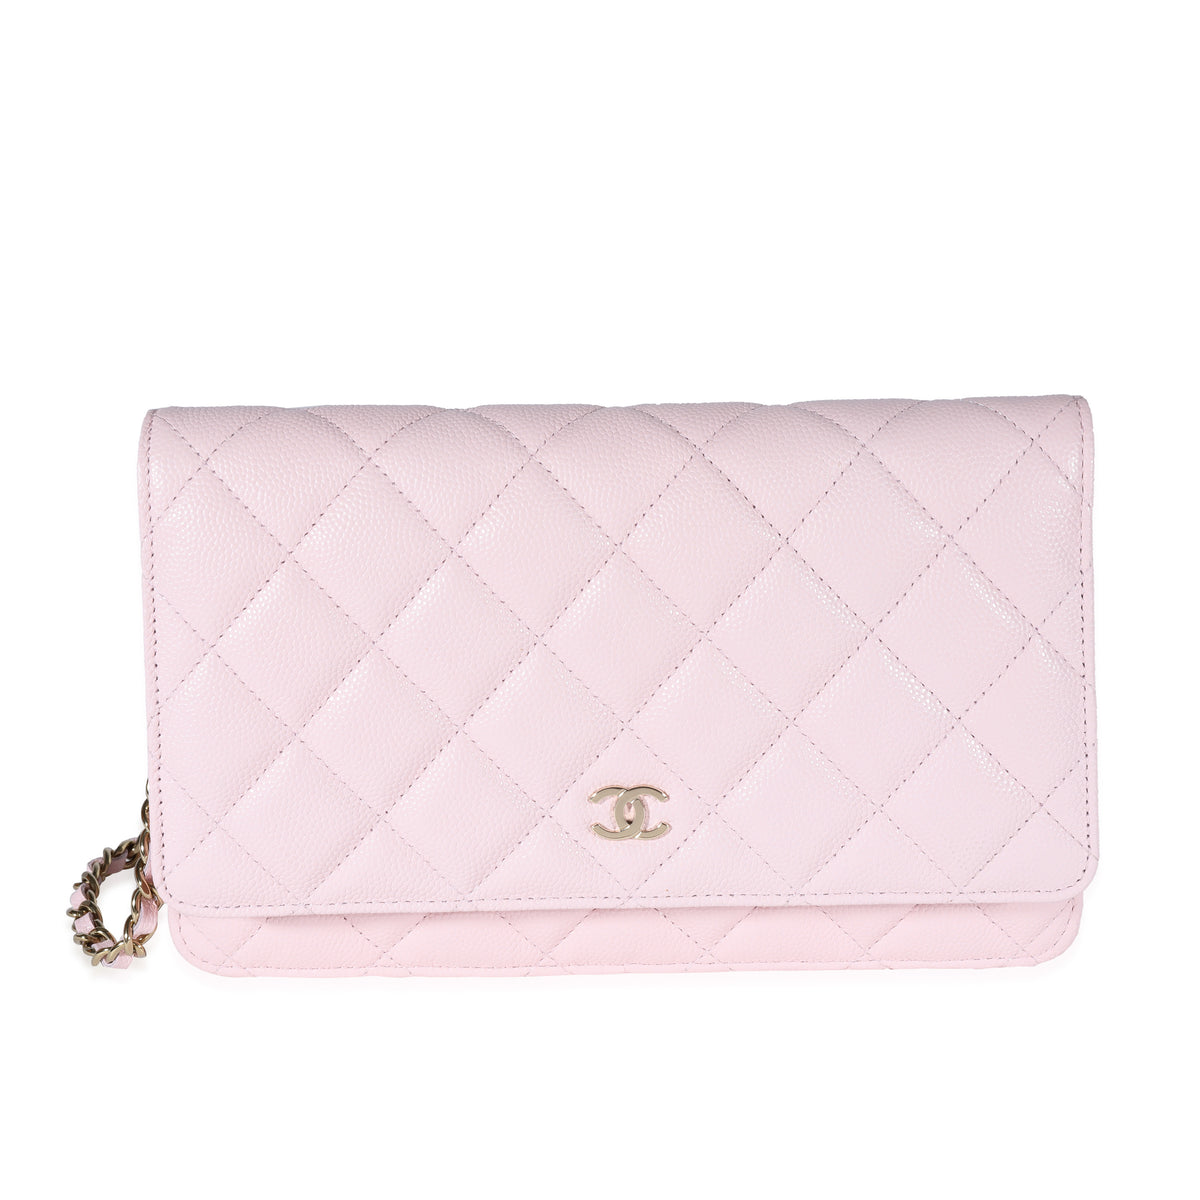 Chanel Pale Pink Quilted Caviar Wallet on Chain